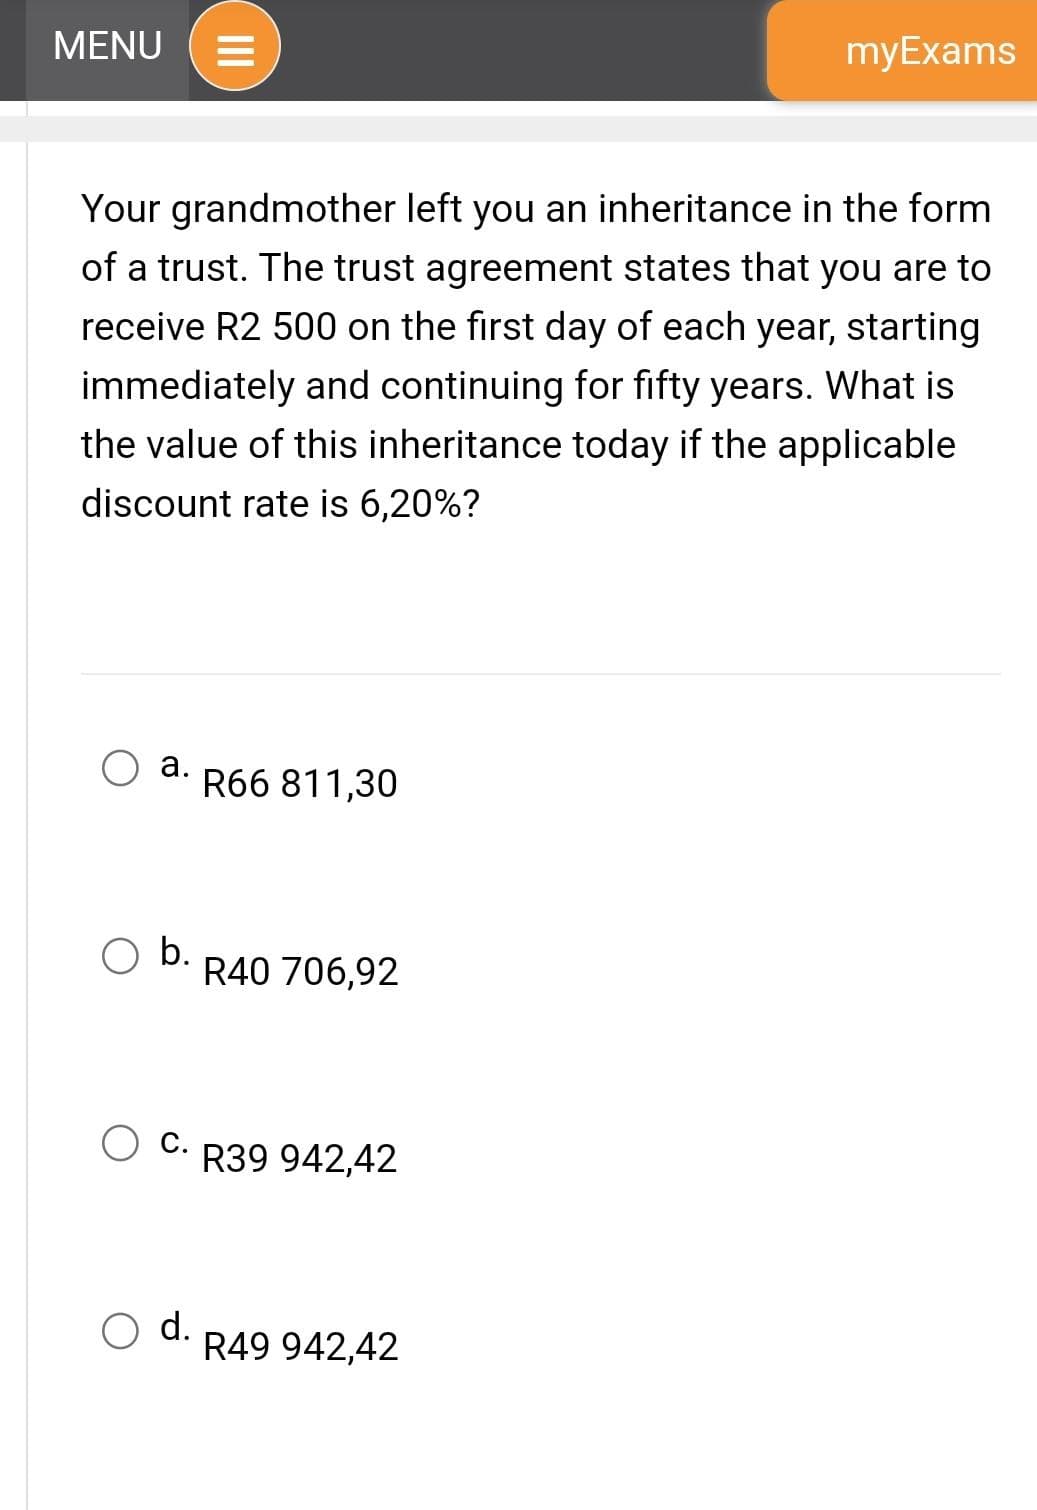 MENU =
a.
Your grandmother left you an inheritance in the form
of a trust. The trust agreement states that you are to
receive R2 500 on the first day of each year, starting
immediately and continuing for fifty years. What is
the value of this inheritance today if the applicable
discount rate is 6,20%?
O b.
III
d.
R66 811,30
R40 706,92
O C.R39 942,42
myExams
R49 942,42